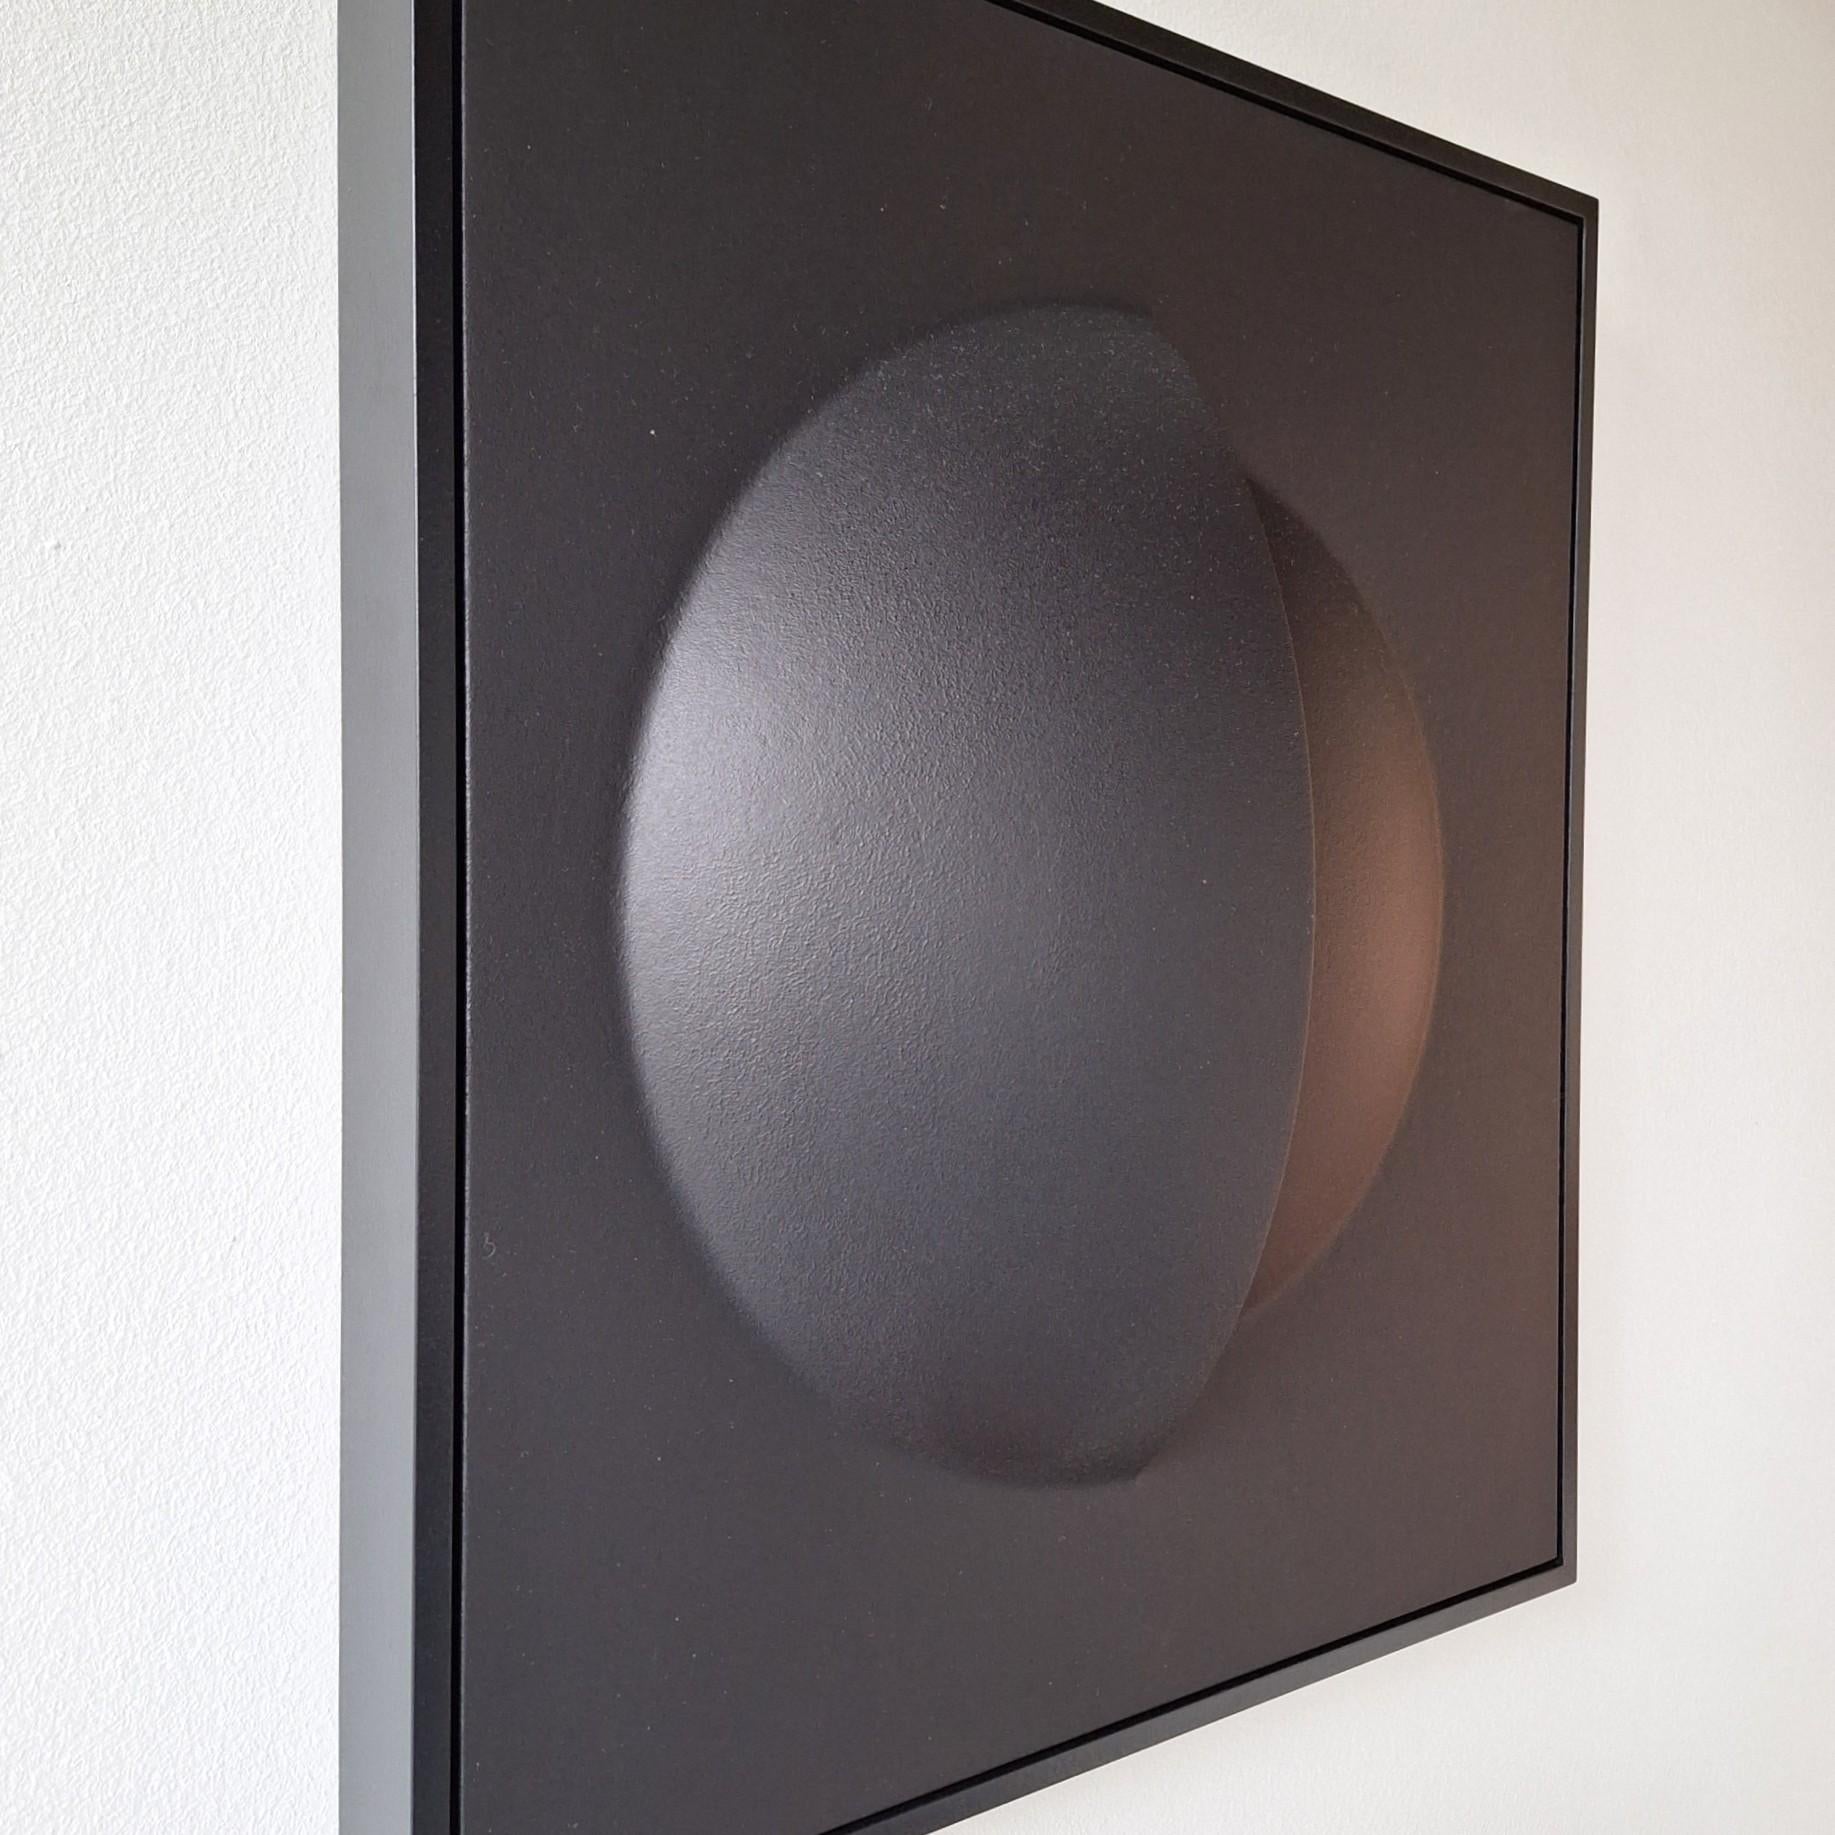 Nocturnal Parts is a unique one-of-a-kind contemporary modern painting relief by Dutch artist Sander Martijn Jonker. It is a relief consisting of two open spherical parts with an intriguing matte black finish, perhaps a bit mysterious but very